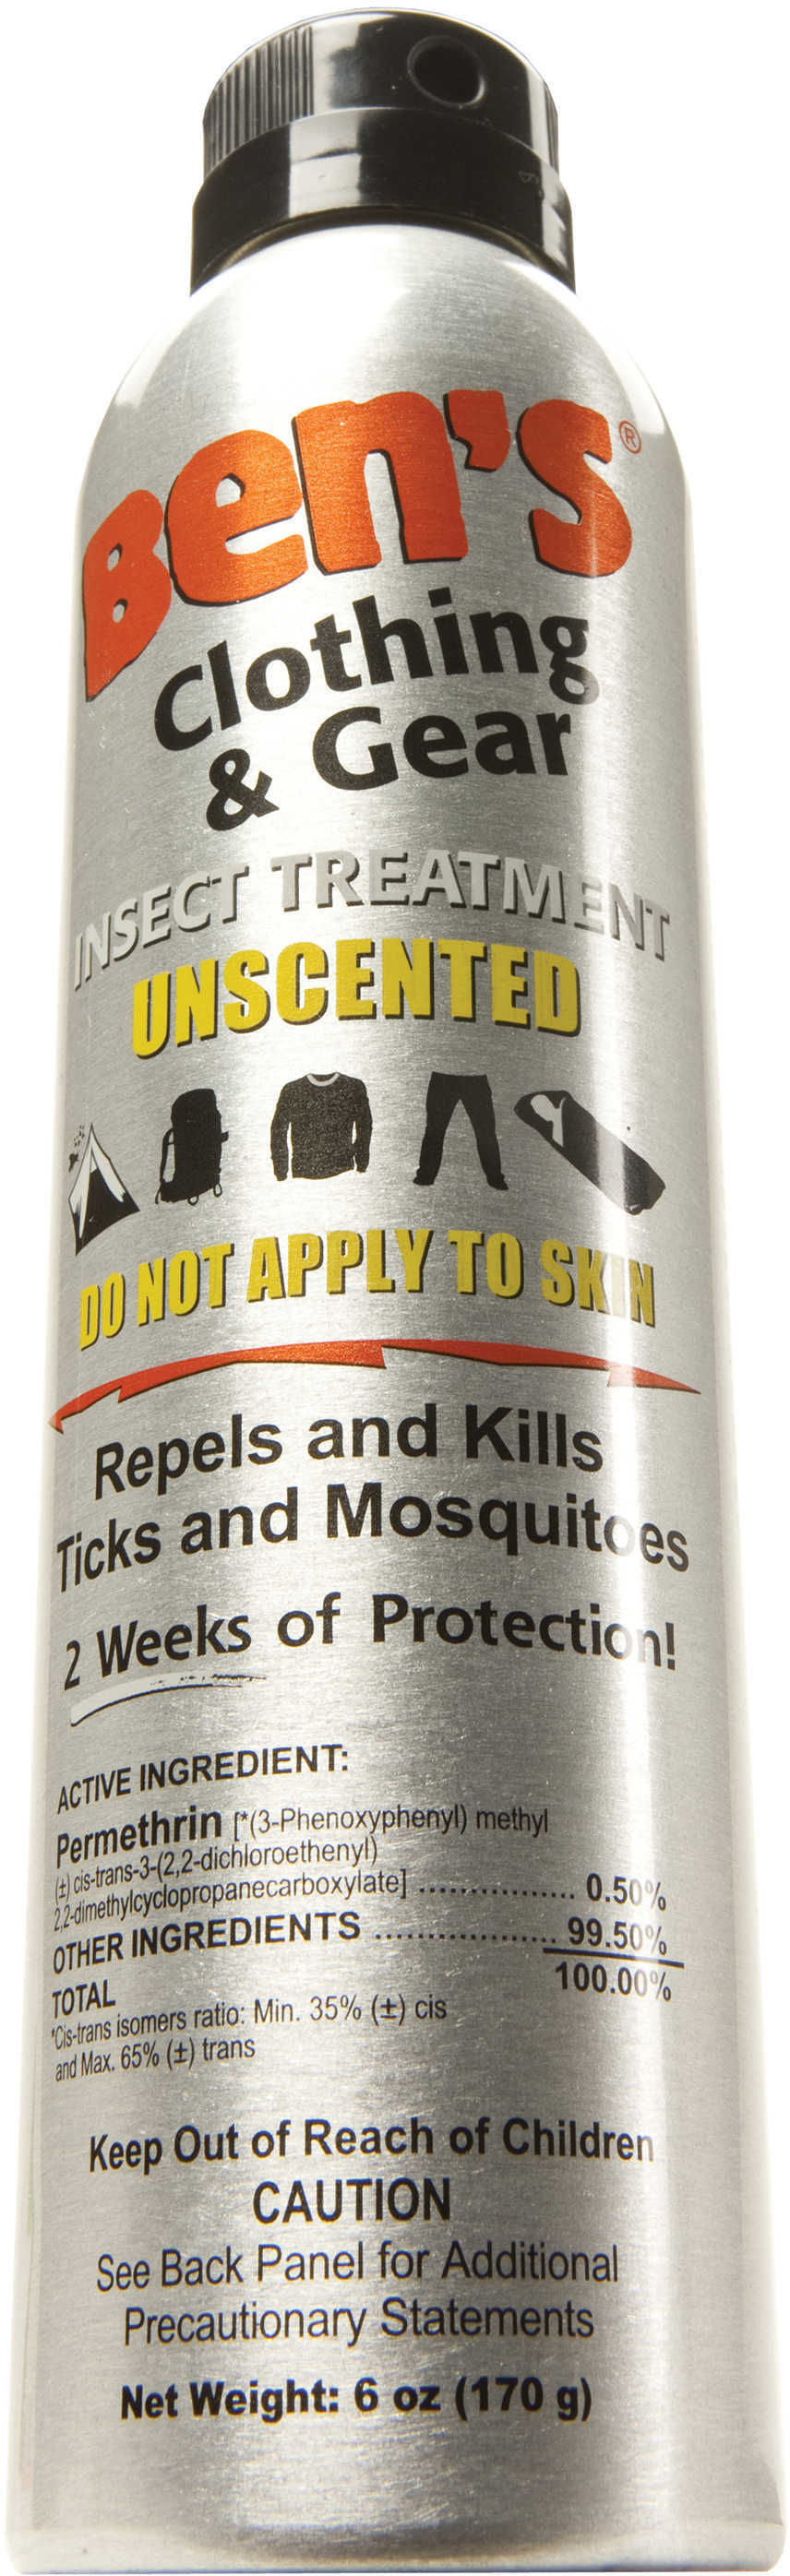 Bens / Tender Corp AMK Clothing/Gear INSECT Repellent PERMETHRIN 6Oz Spray